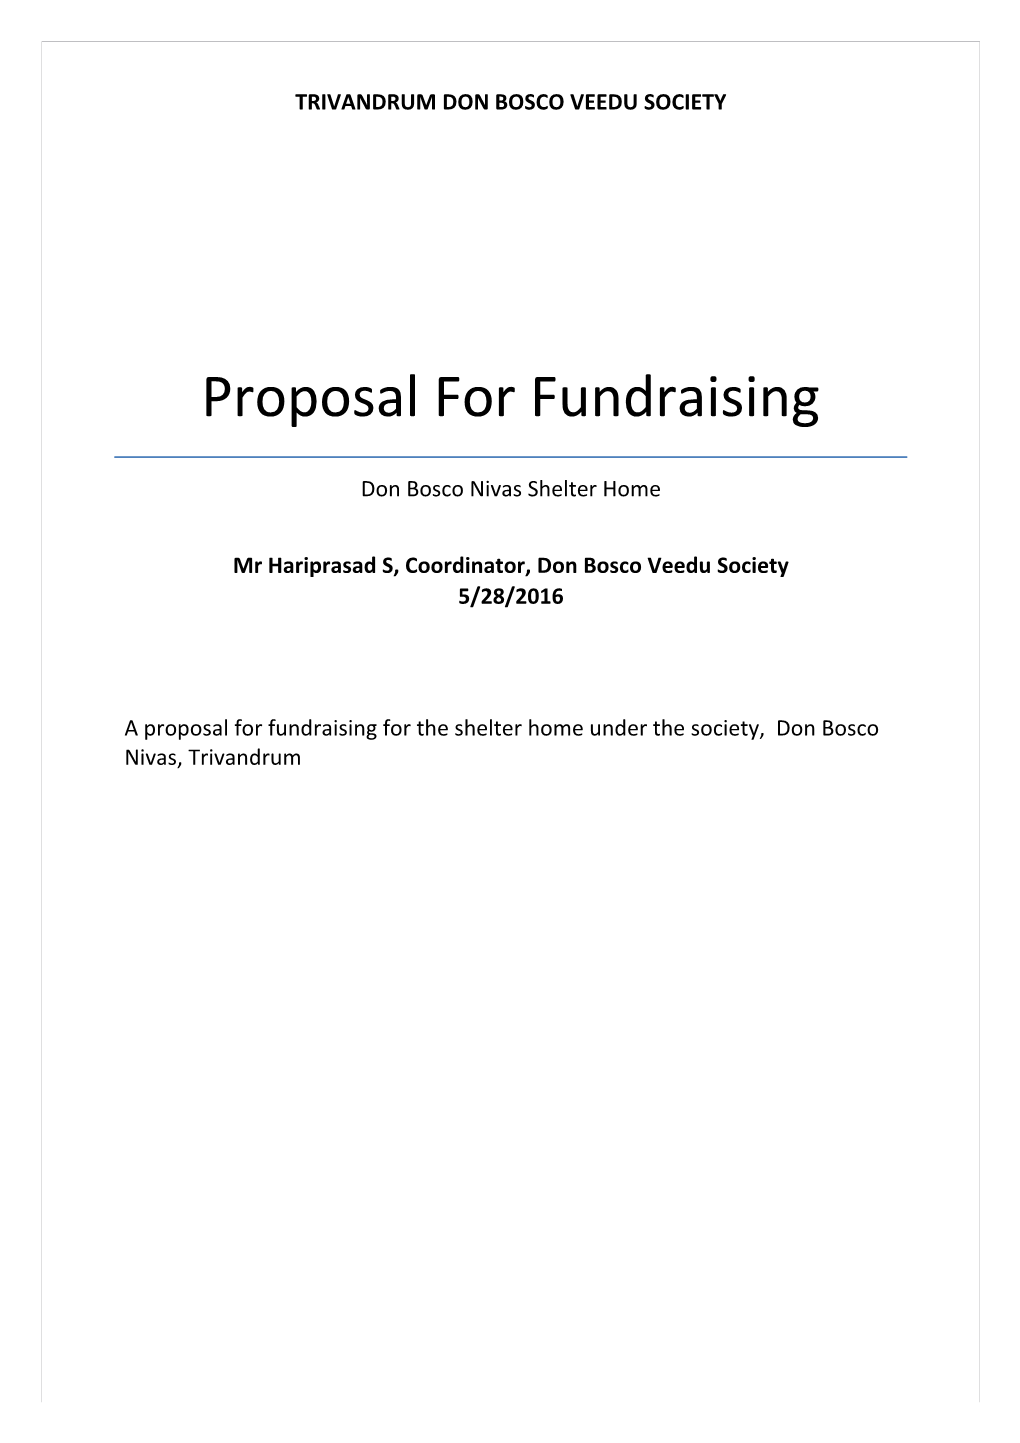 Proposal for Fundraising